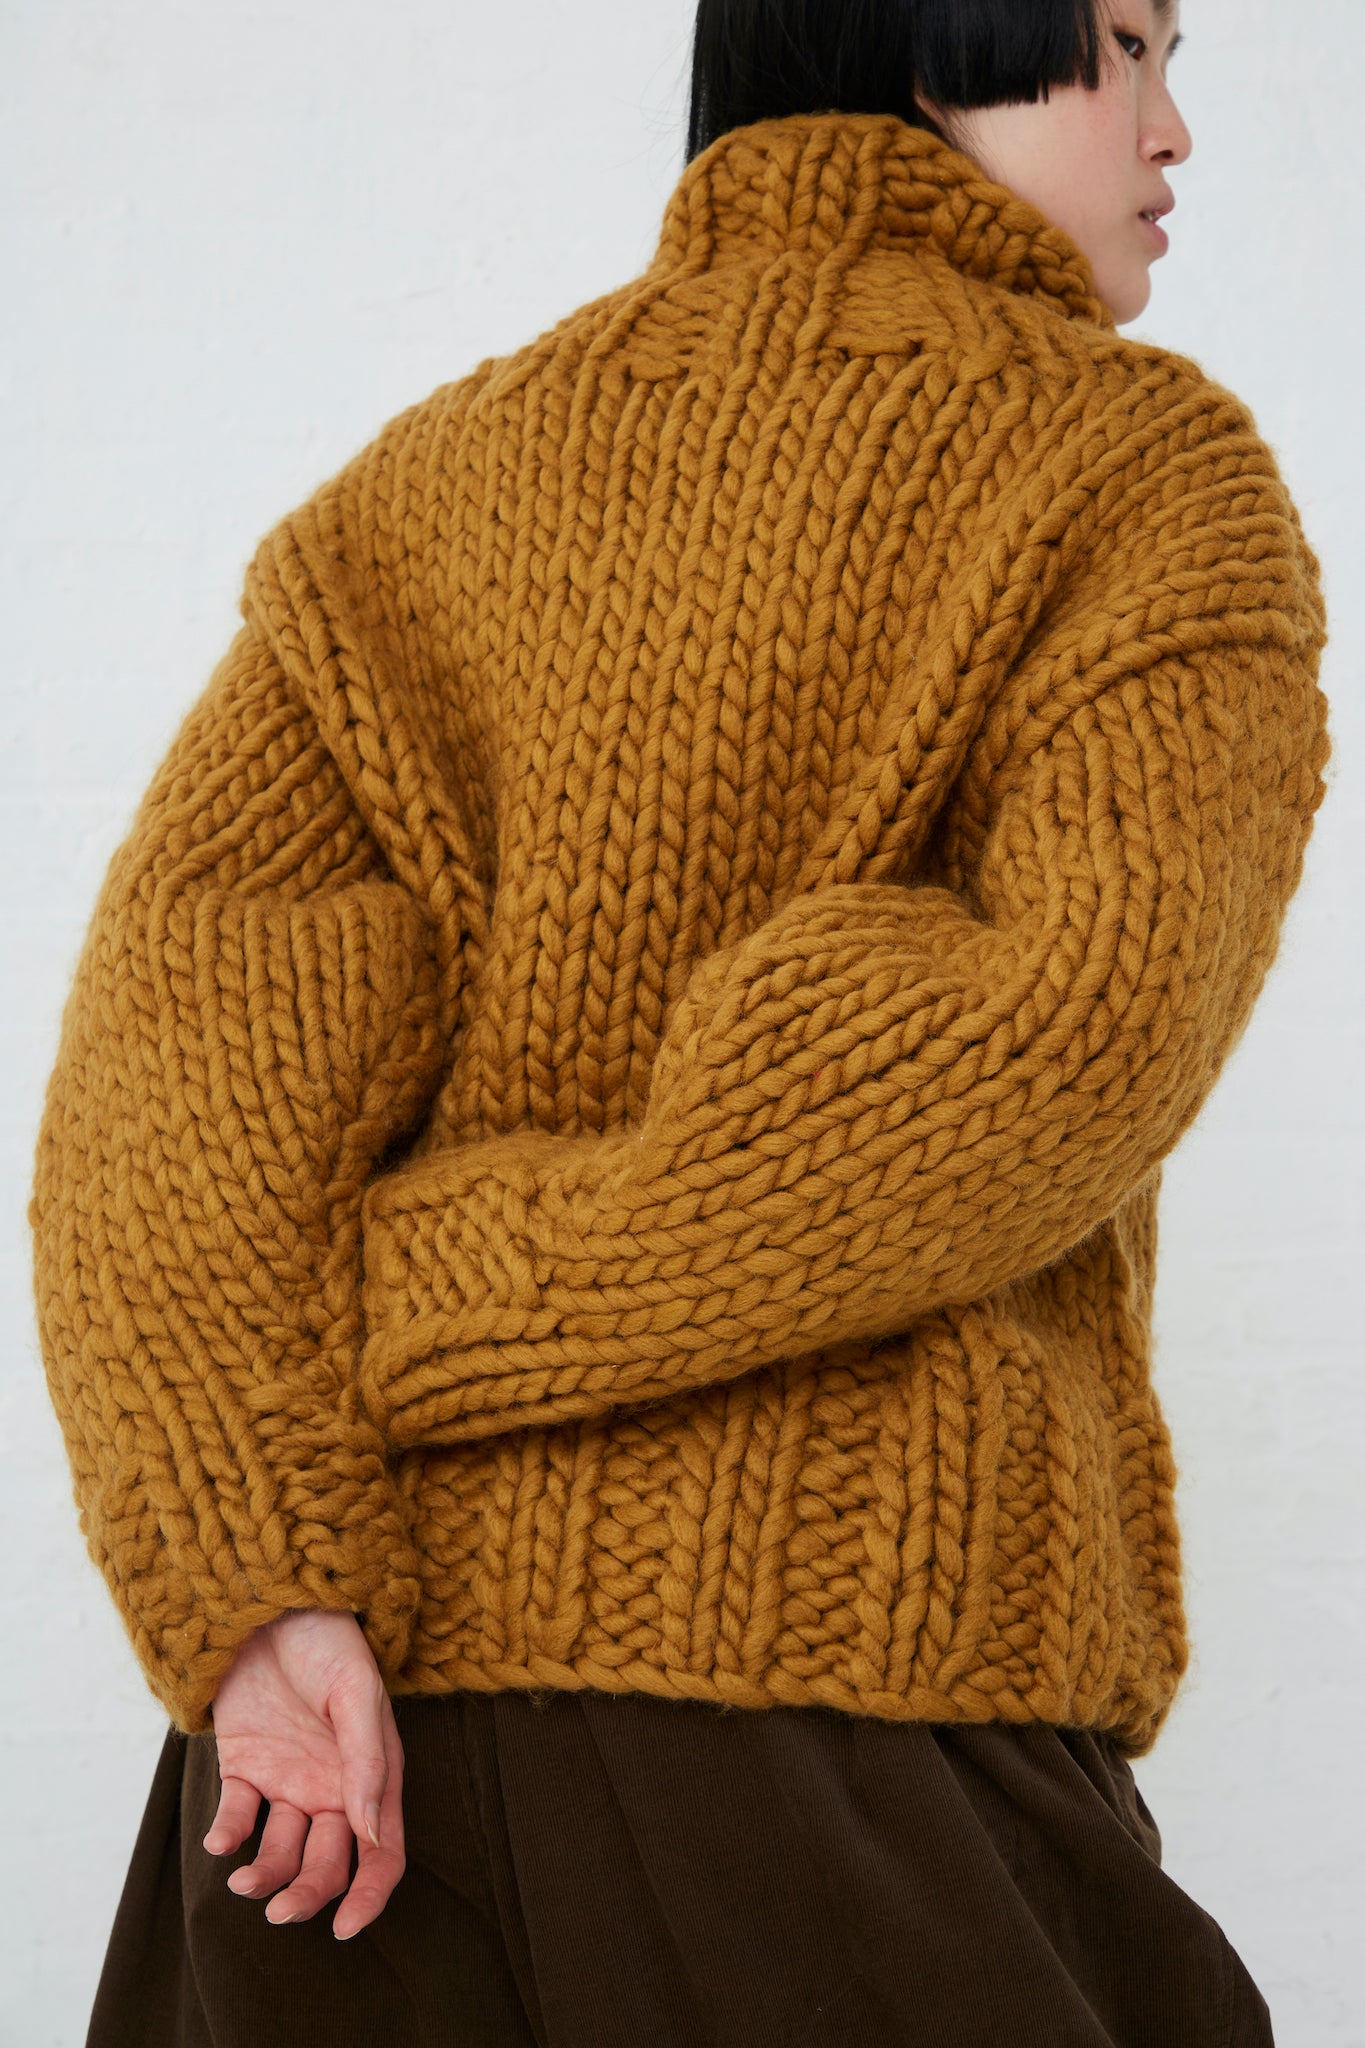 The back of a woman wearing an Ichi Wool Hand-Knit Pullover in Mustard. Arms crossed.